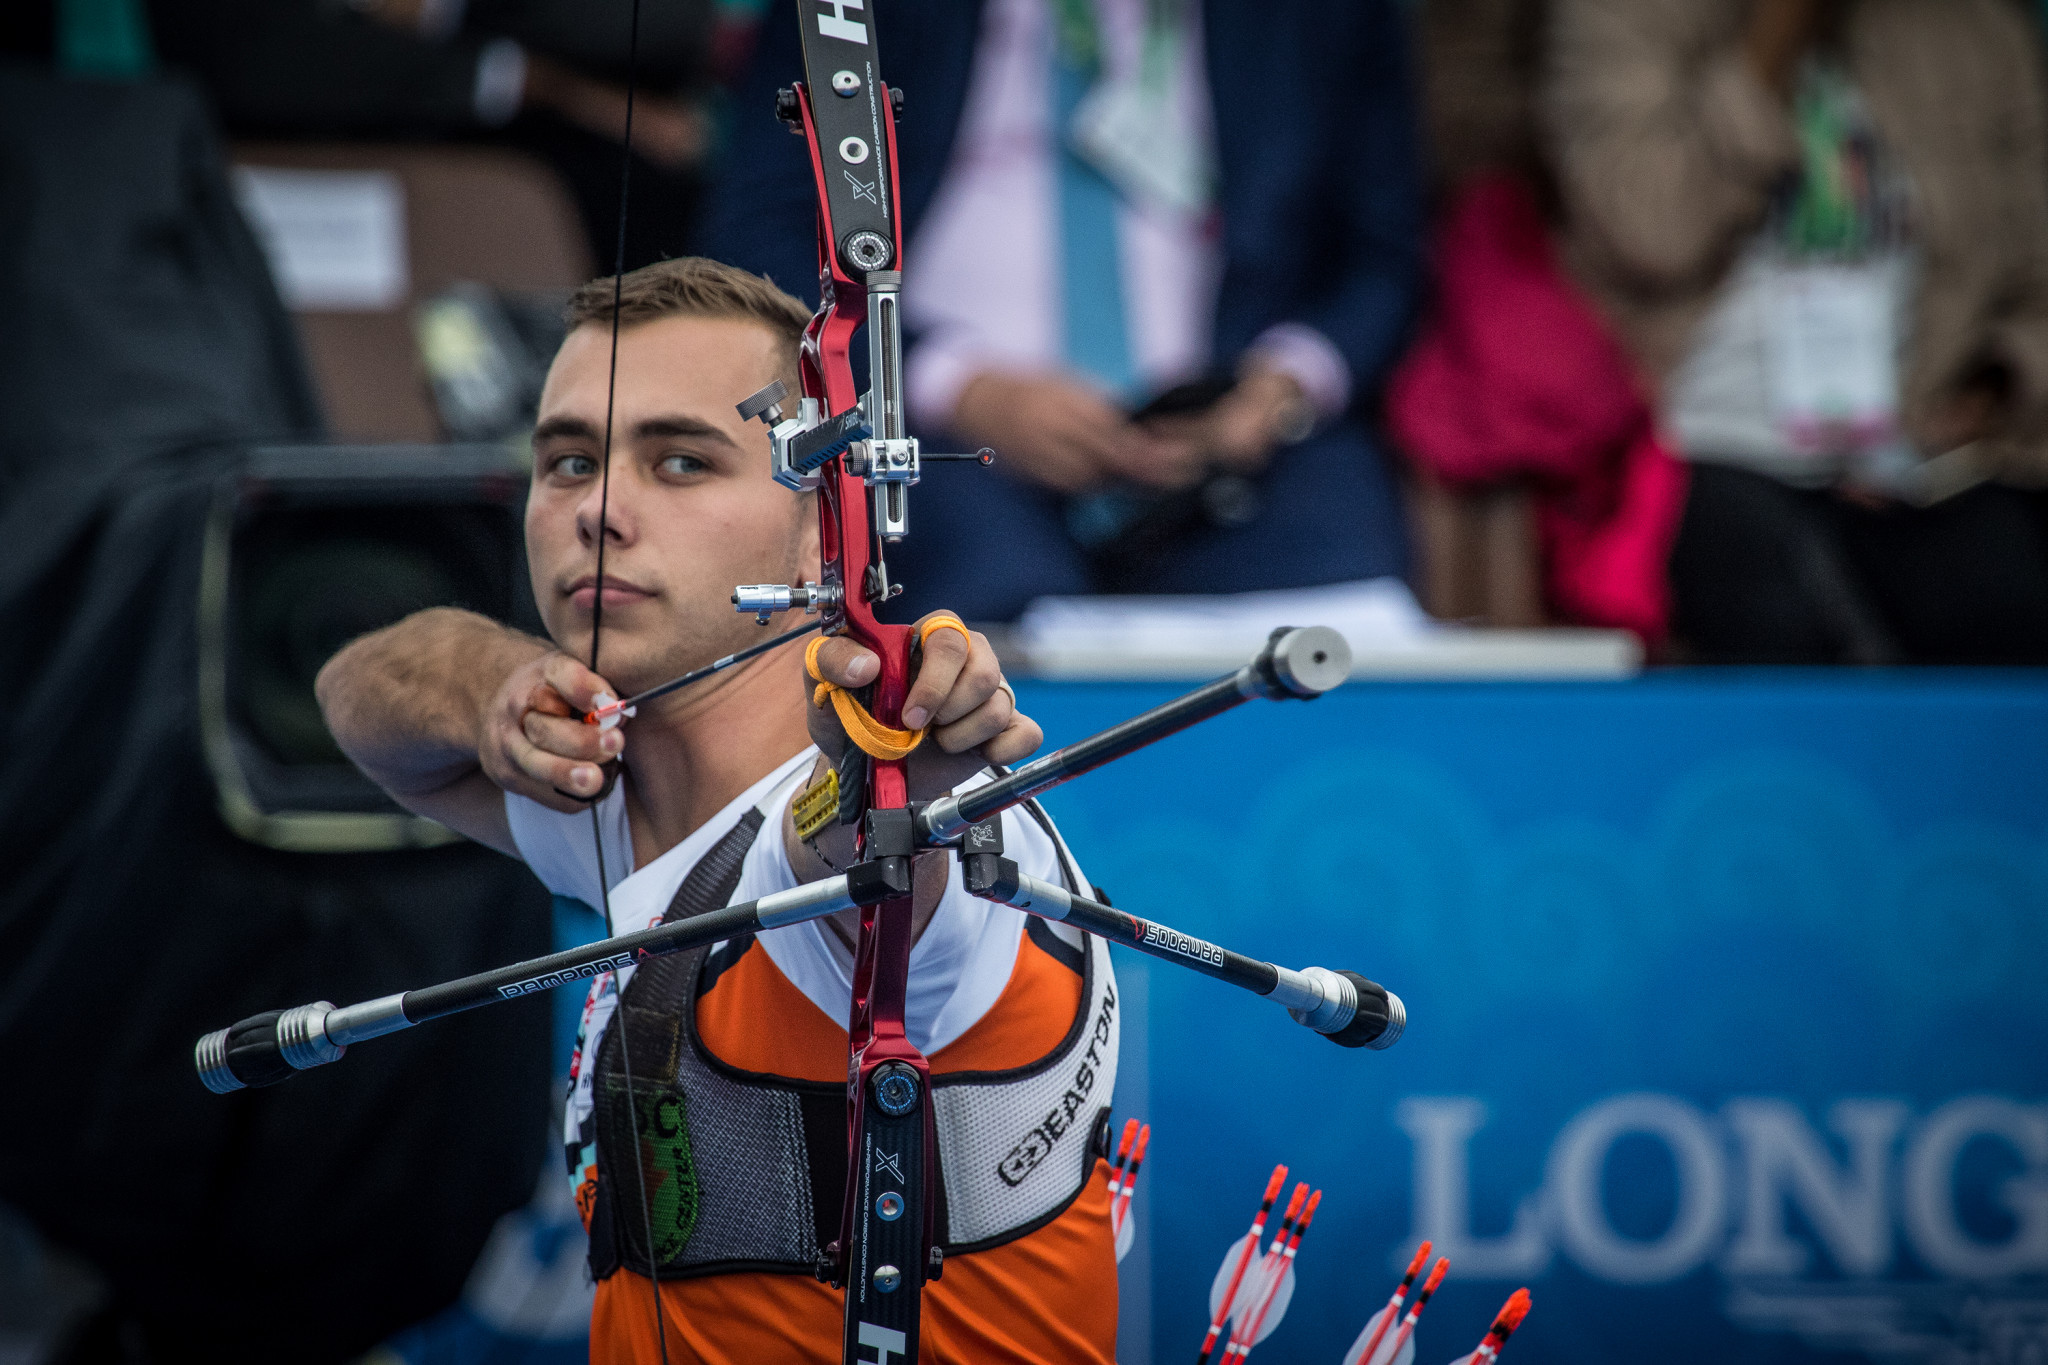 The Netherland's world number one Steve Wijler advanced in the men's recurve ©Getty Images